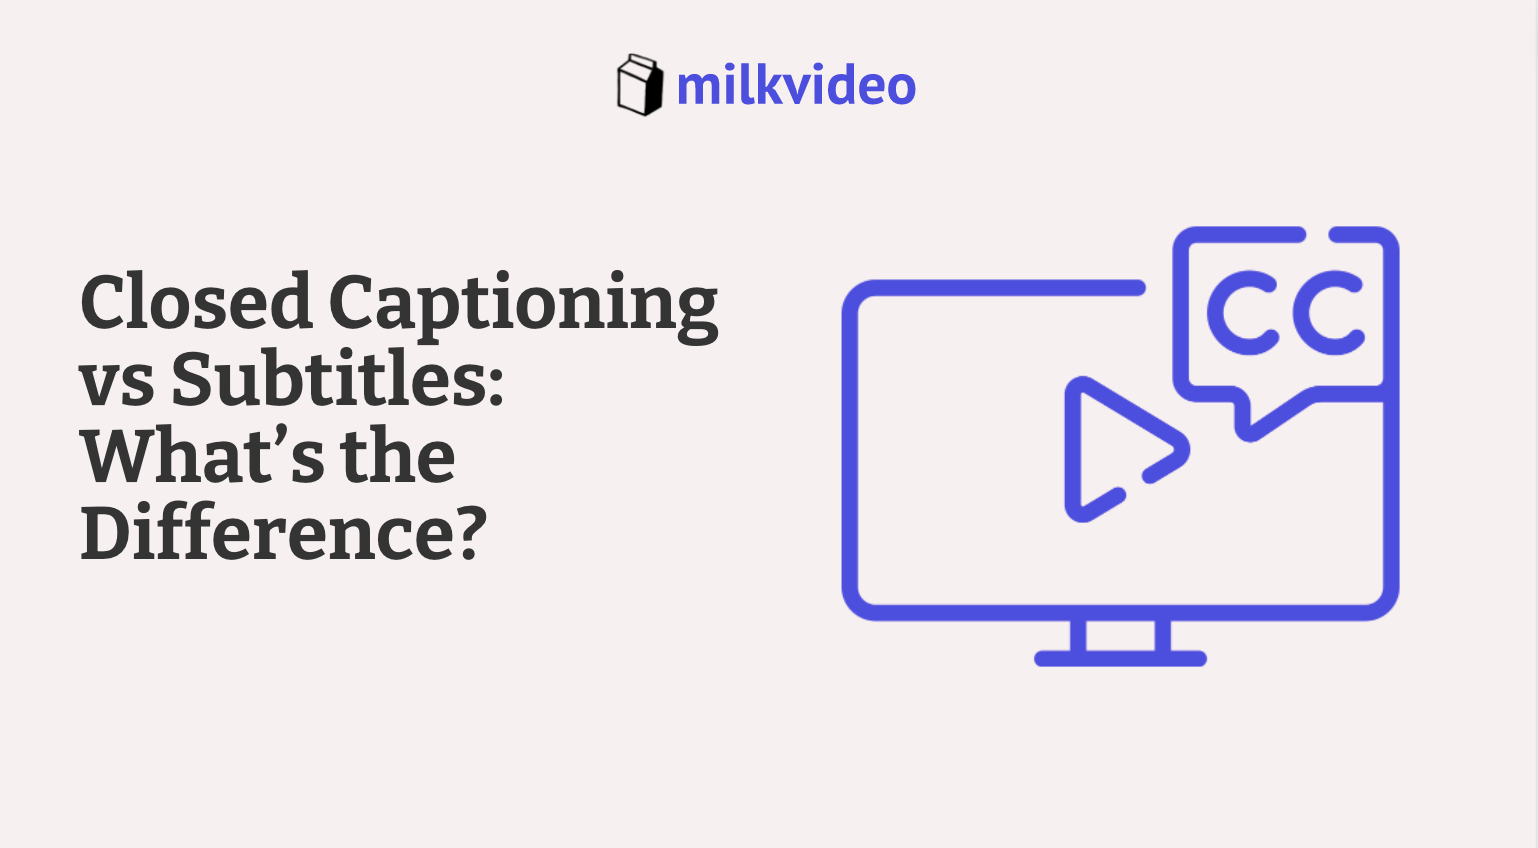 Closed Captioning vs Subtitles: What’s the Difference?